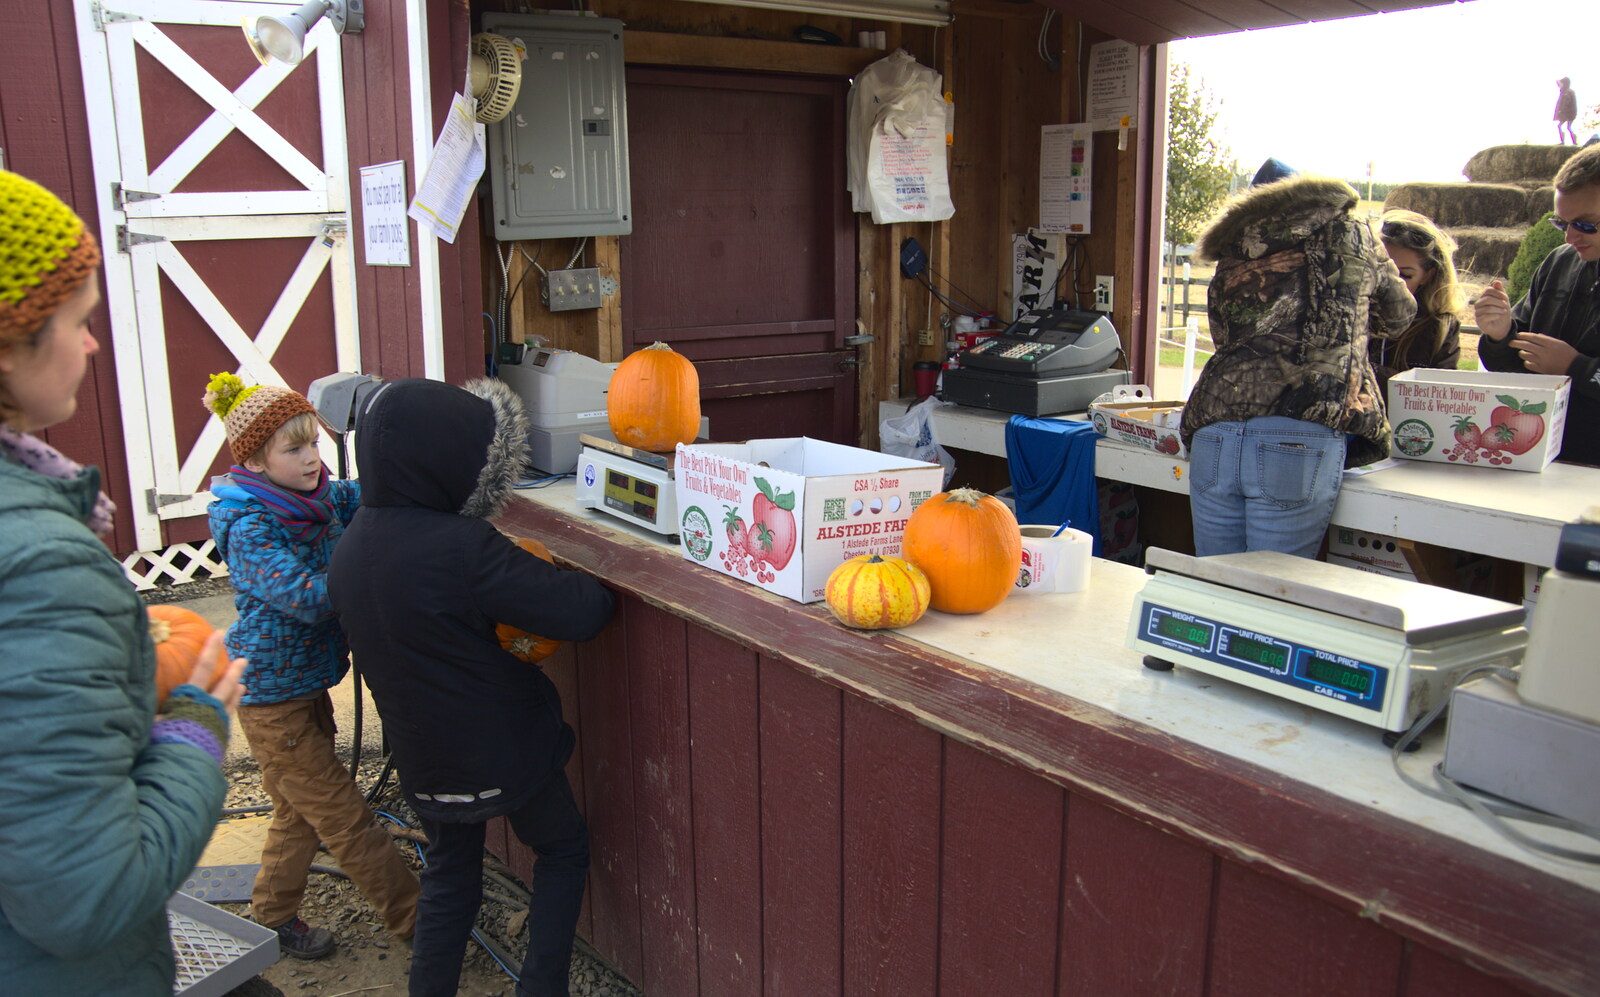 Fred hauls a pumpkin up to the counter from Pumpkin Picking at Alstede Farm, Chester, Morris County, New Jersey - 24th October 2018